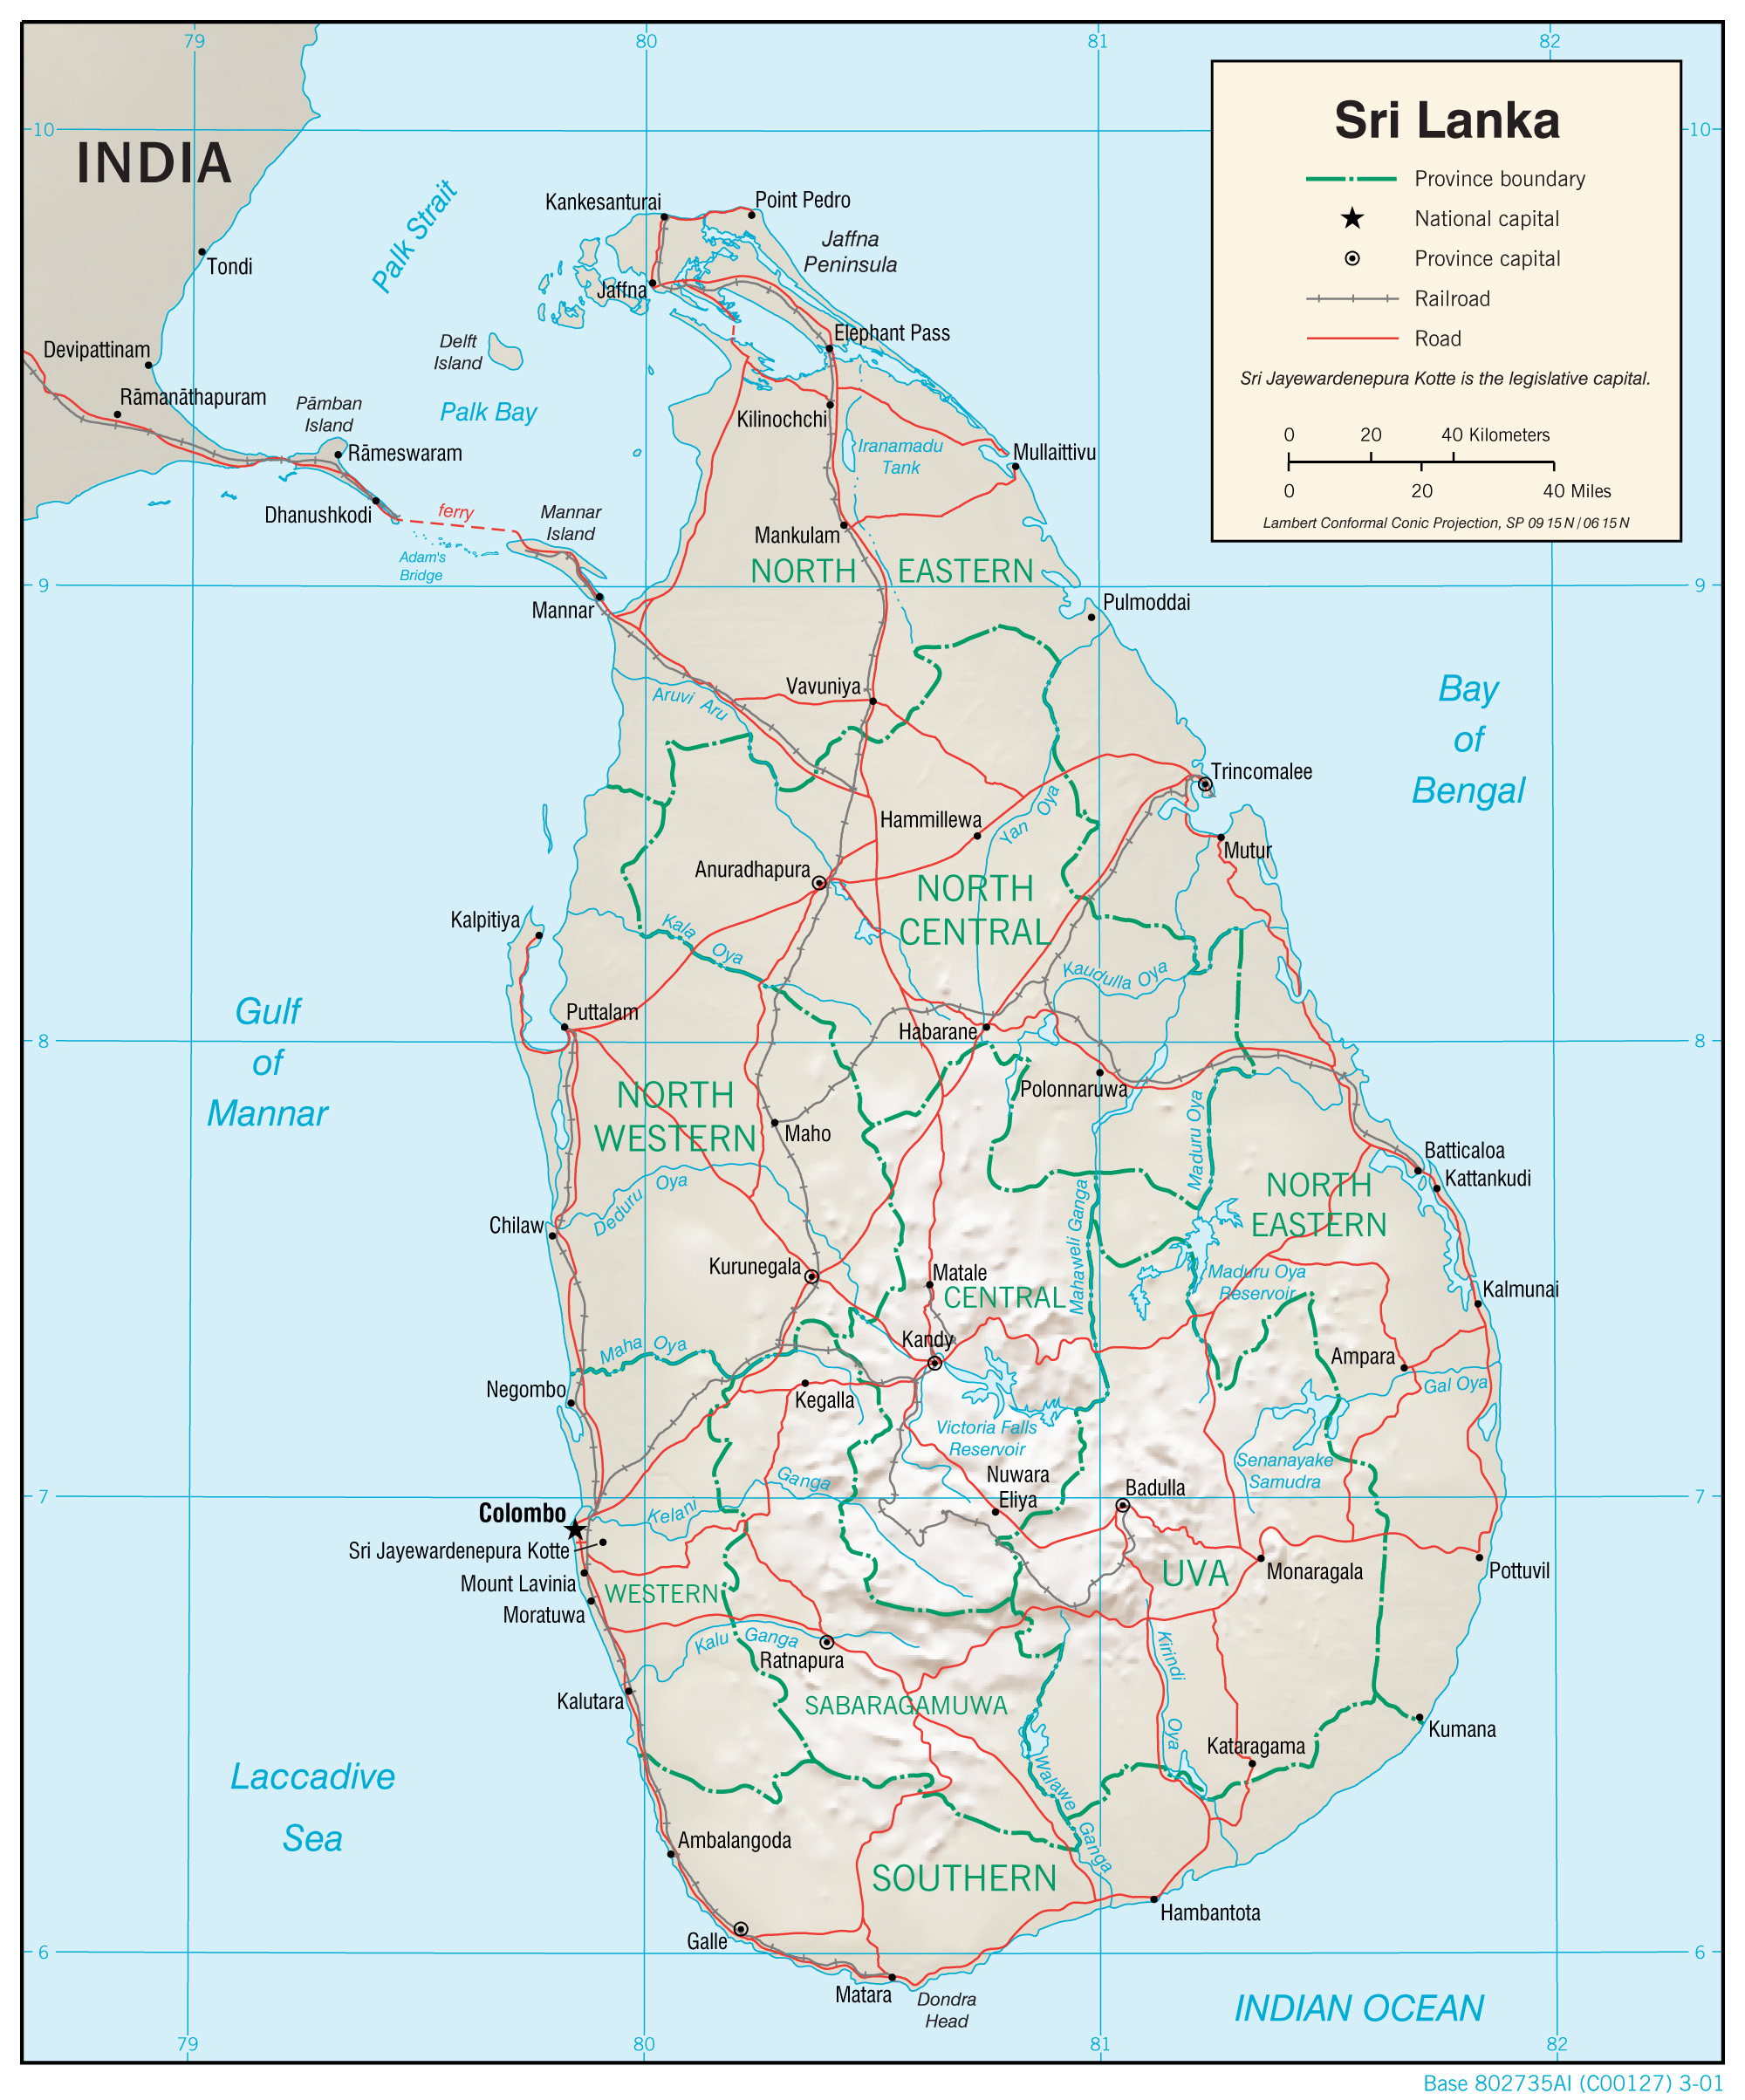 Sri Lanka Maps - Perry-Castañeda Map Collection - UT Library Online